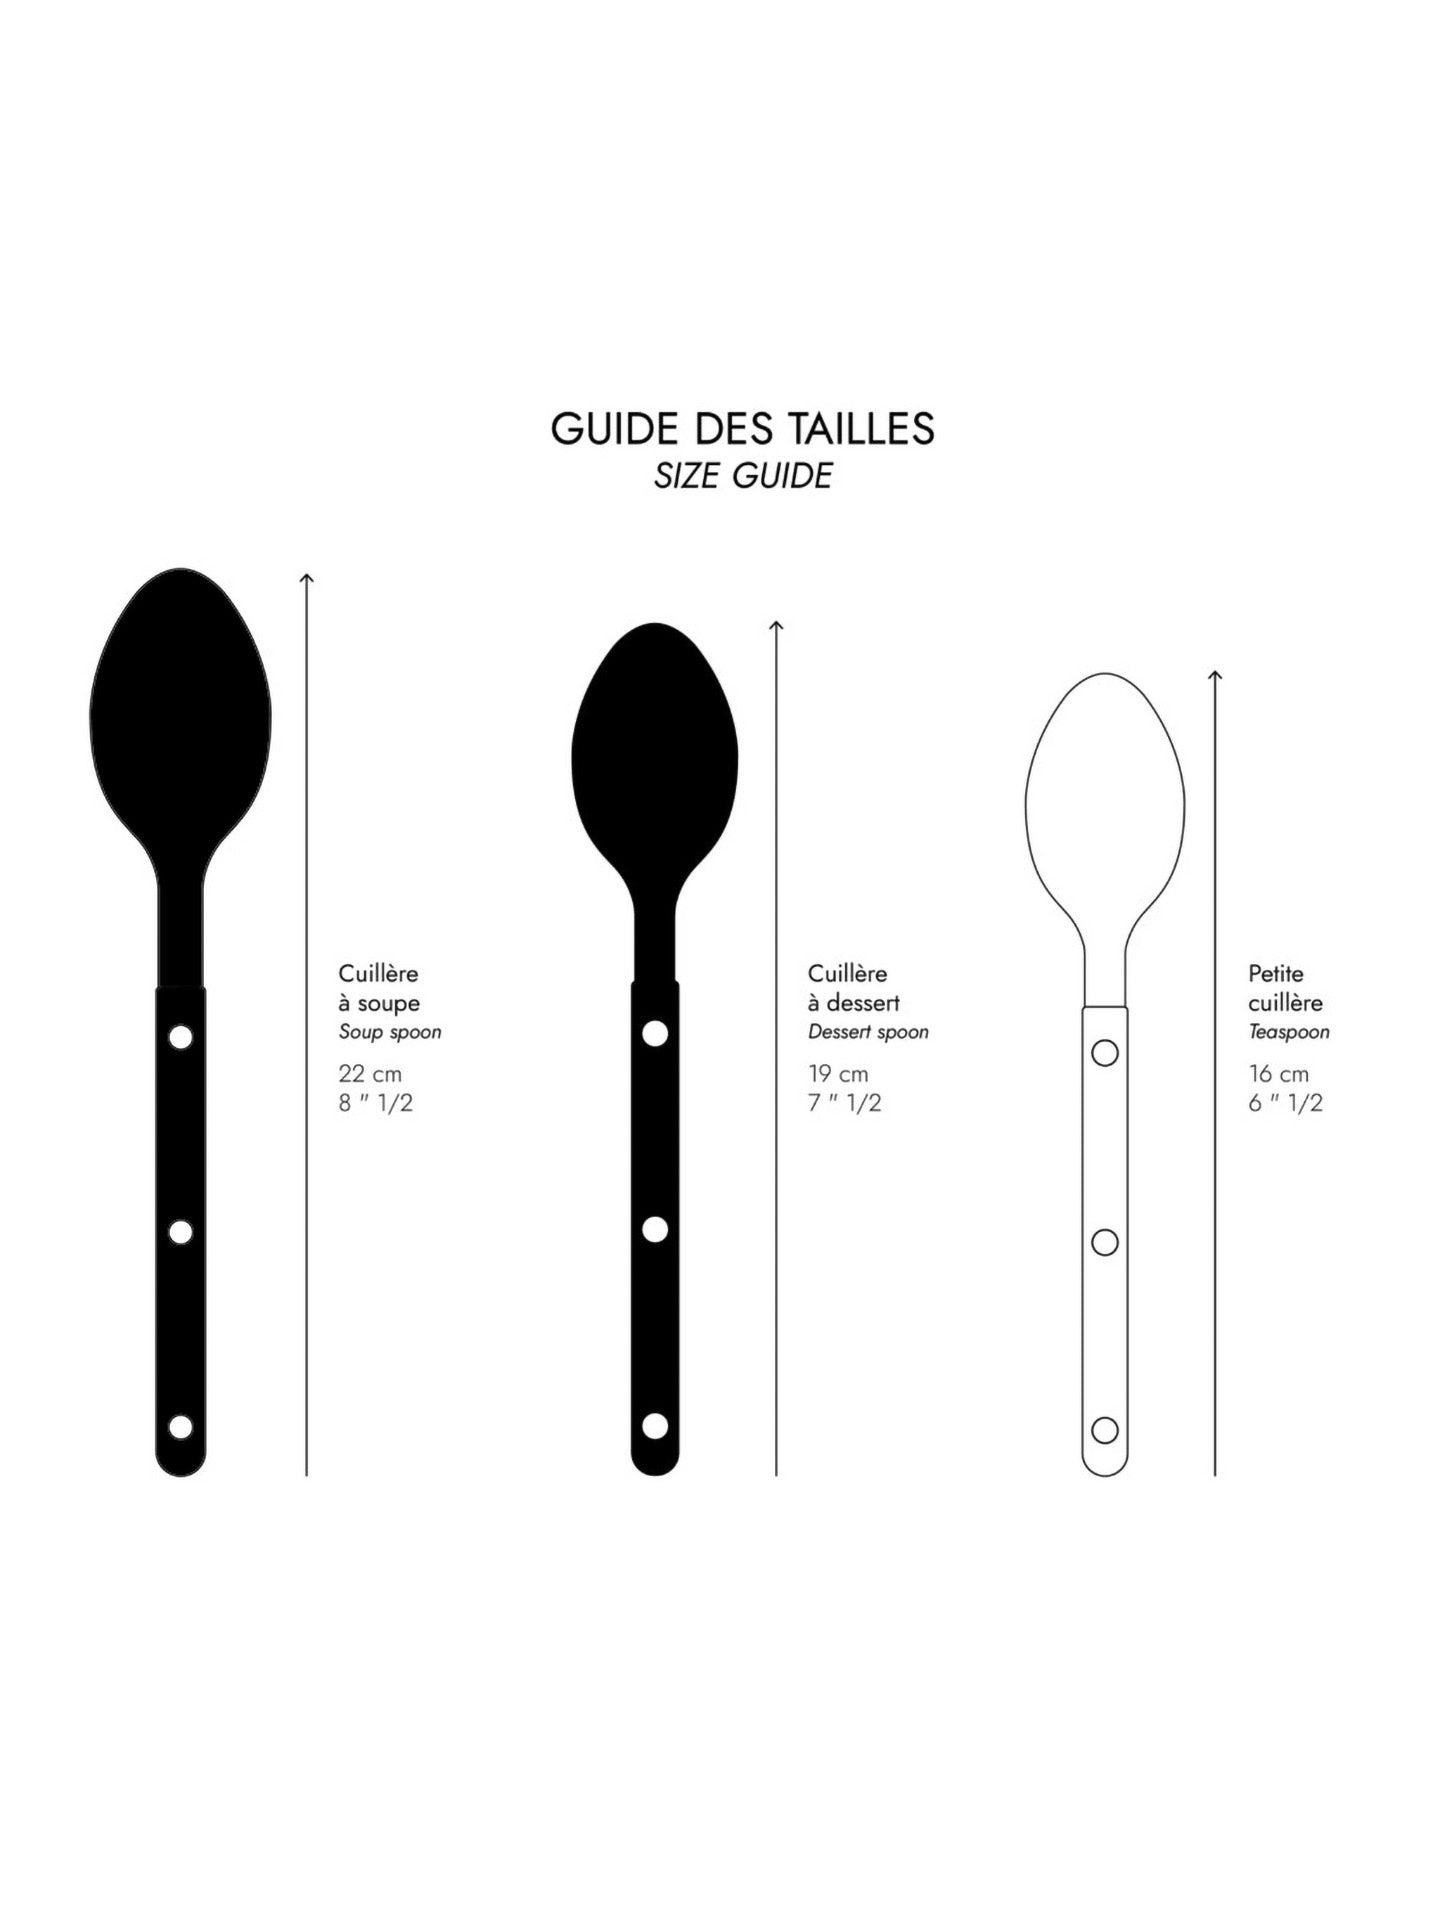 Teaspoon measures 16 cm and is the smallest of the spoon. 